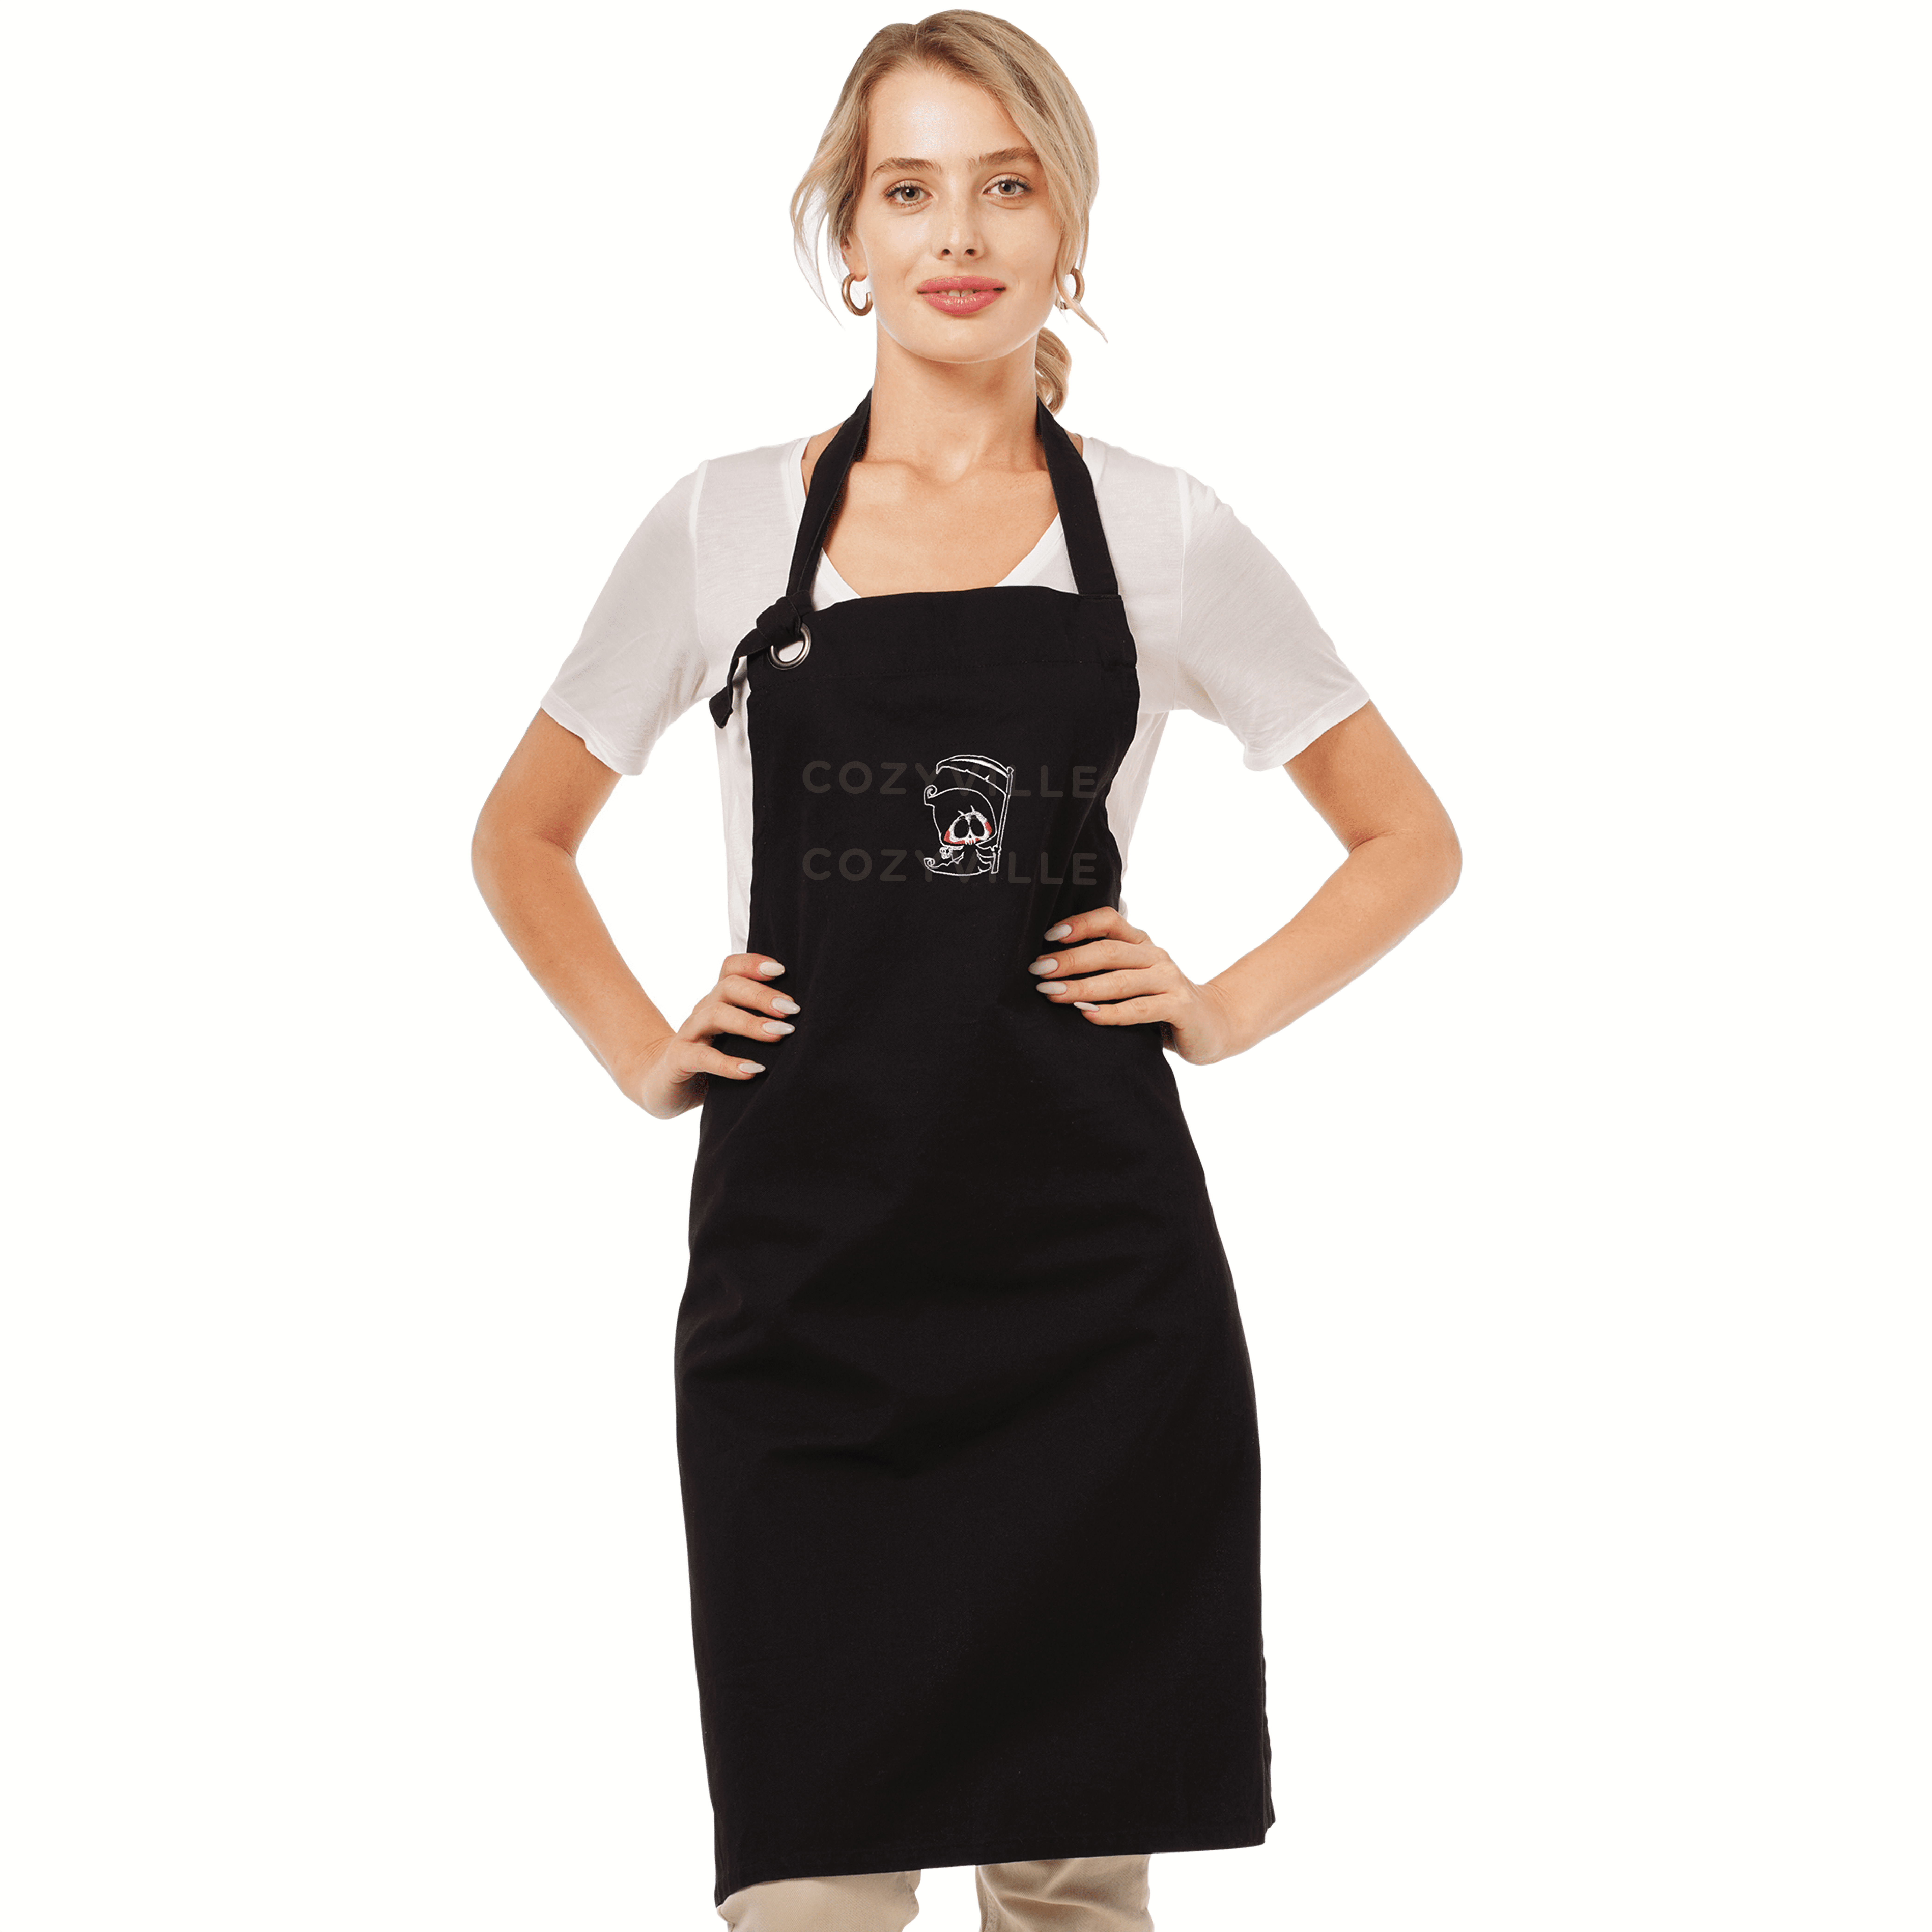 Men Chef Protect from Food Stains Black Apron Cooking Kitchen Apron For Women